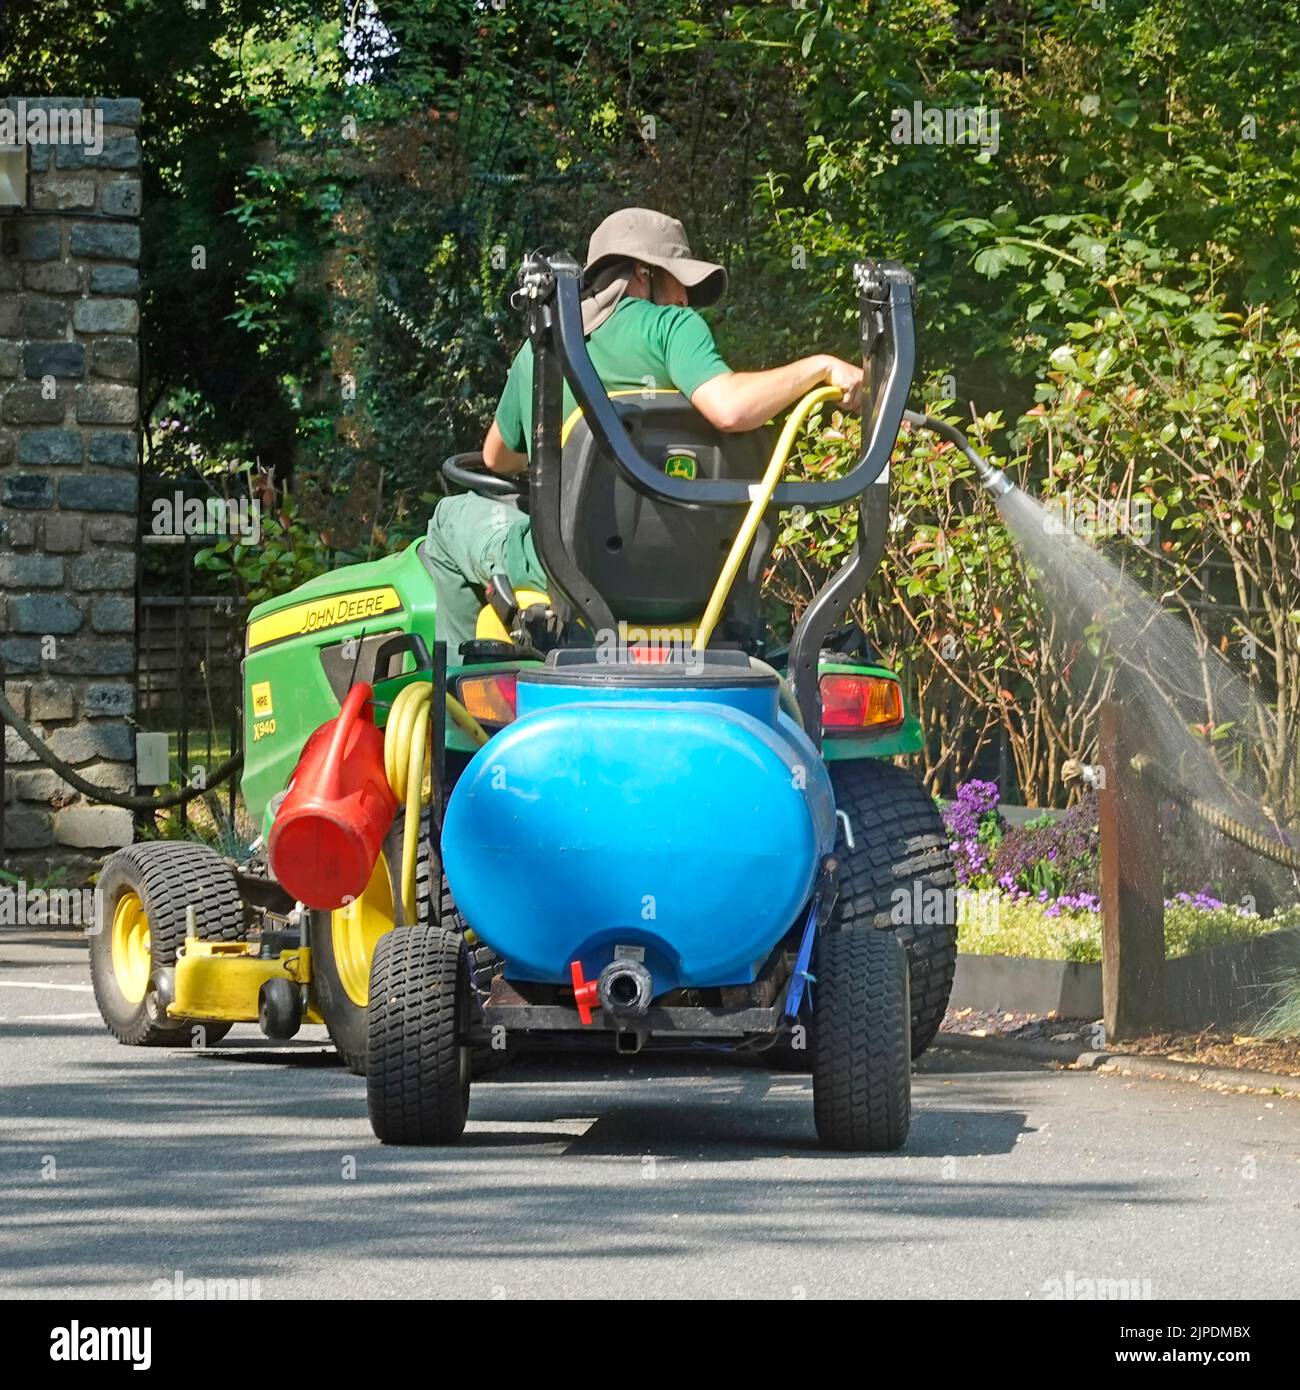 Gardener sitting high up on John Deere mini tractor towing a blue mini pumped water tanker trailer spraying flowers in hotel country estate England UK Stock Photo